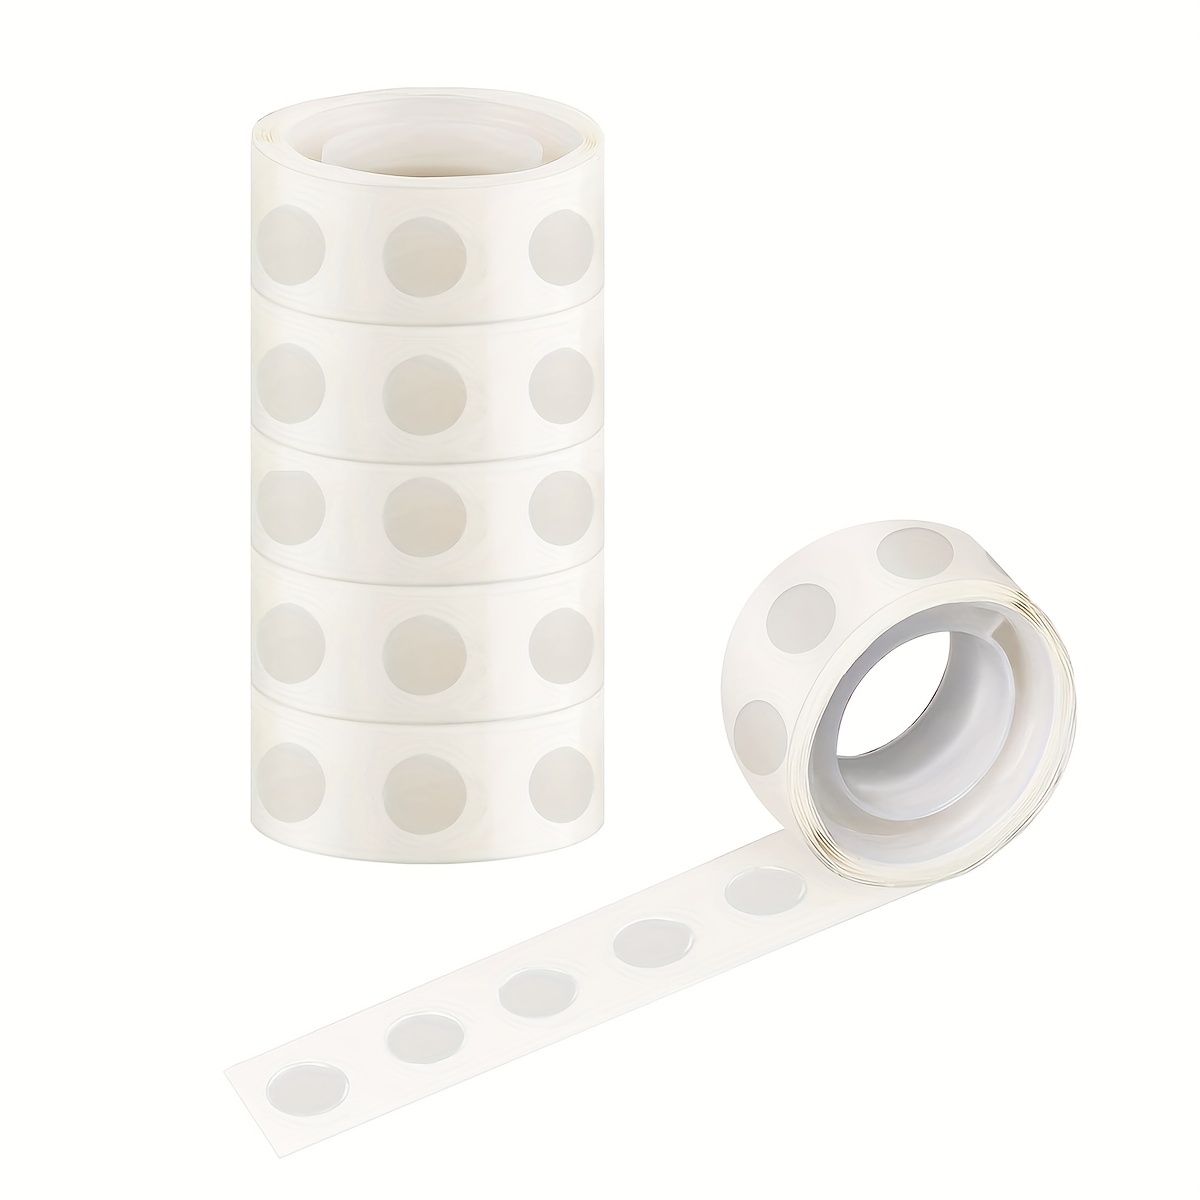 100Points Roll Double-sided Adhesive Dots Removable Balloon